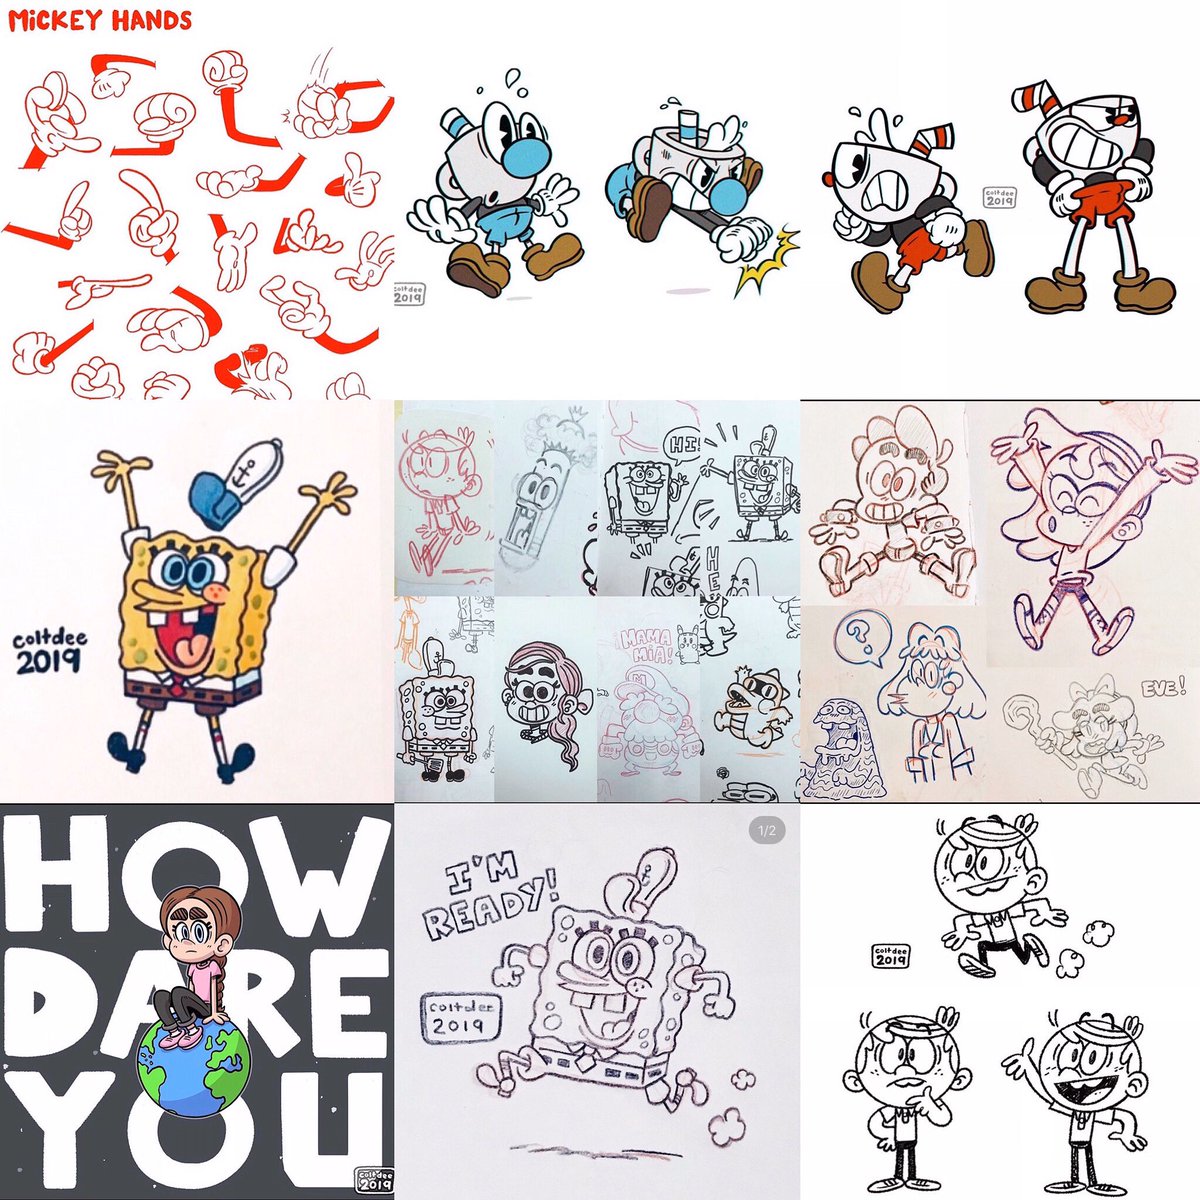 #topnine2019 from my Instagram! Enjoy and looking forward to more doodles in 2020